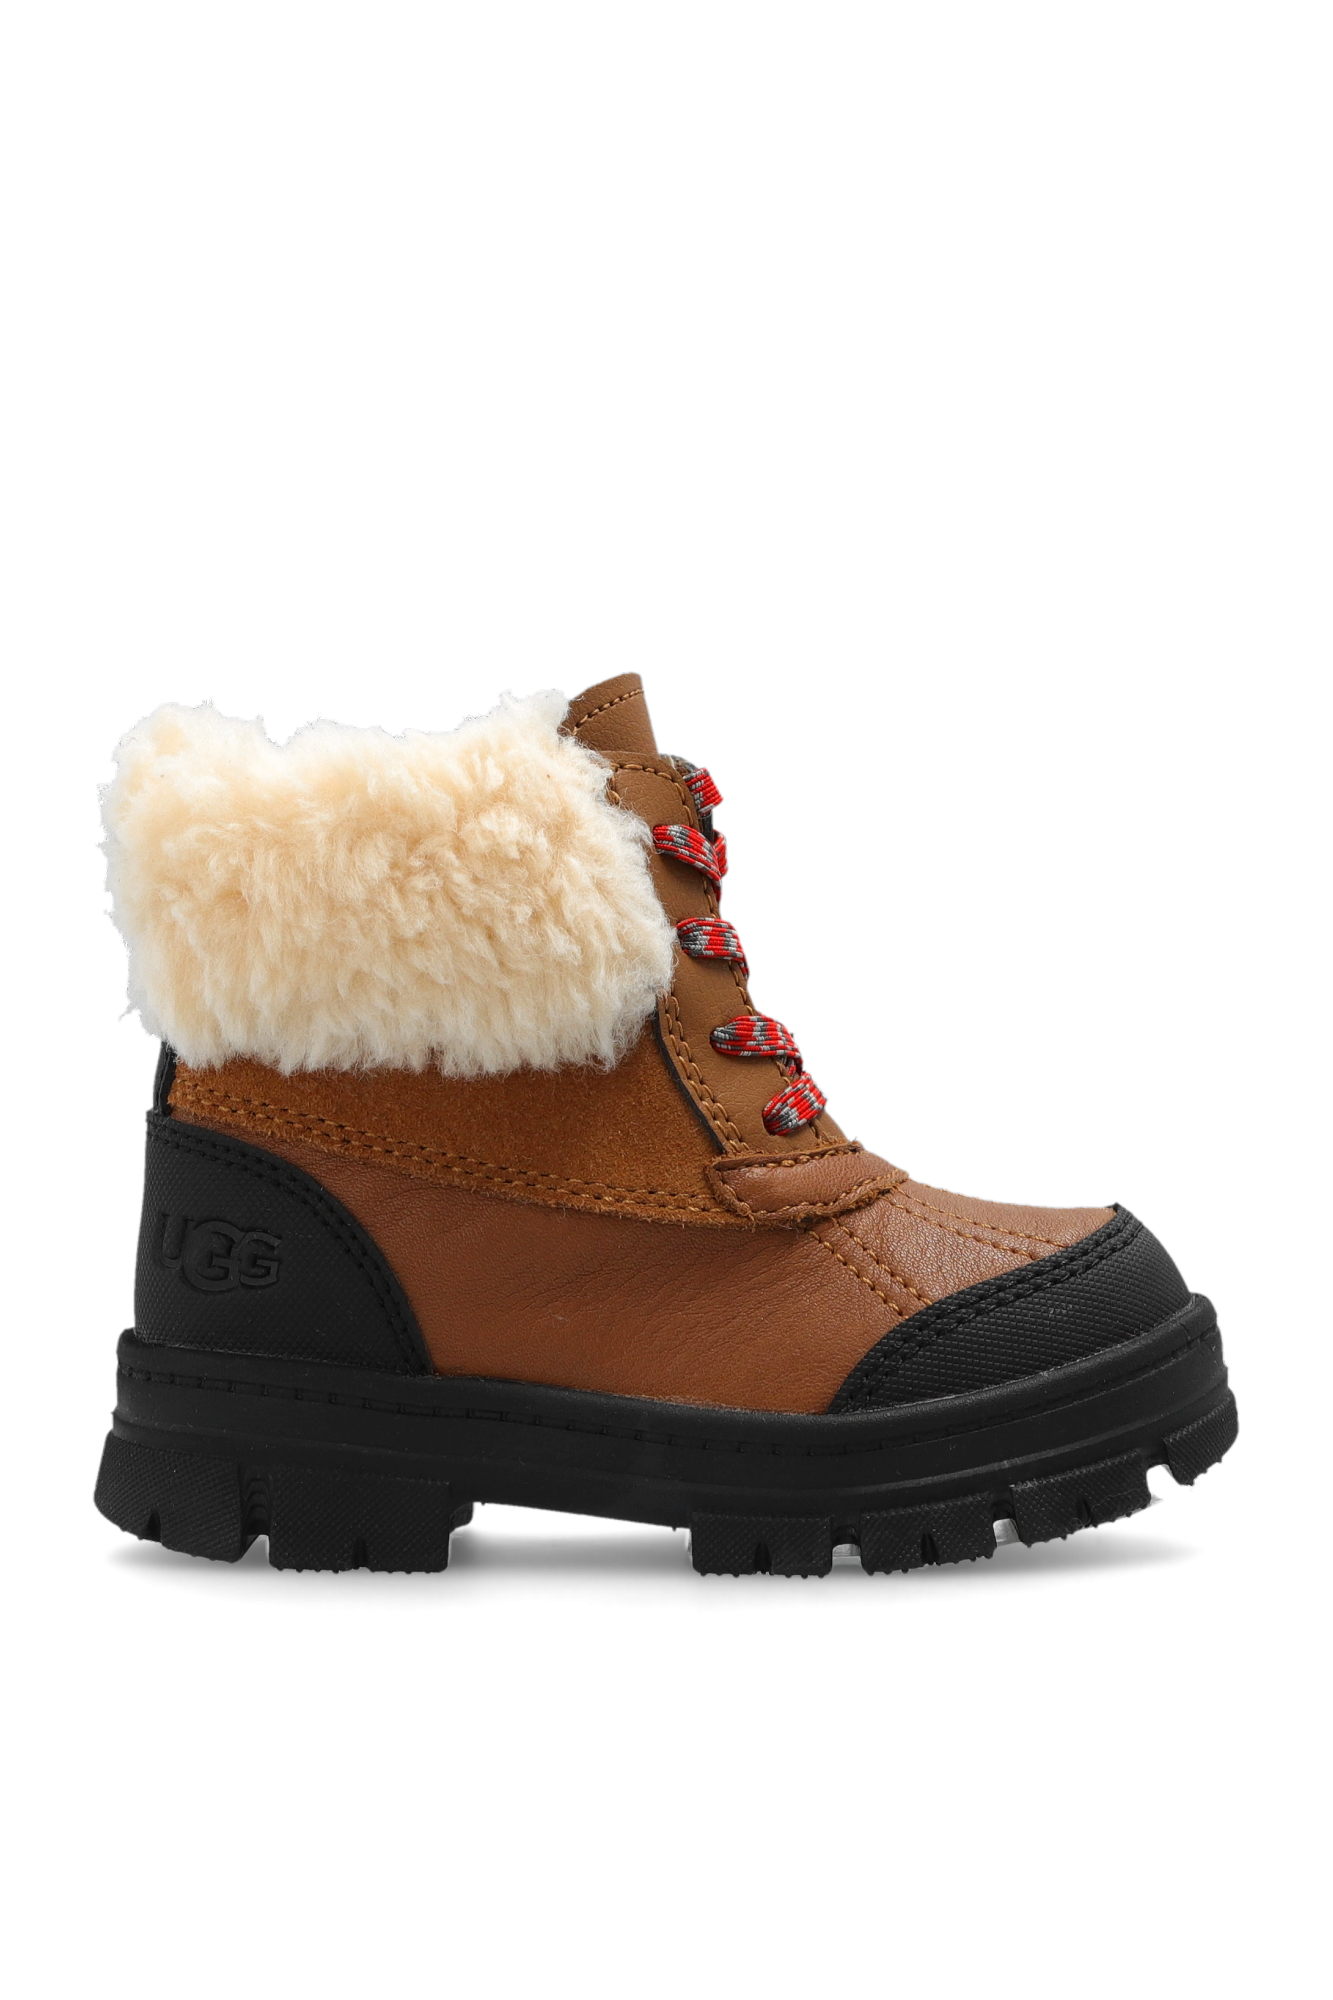 UGG Kids ‘Ashton Addie’ leather ankle boots | Kids's Kids shoes (25-39 ...